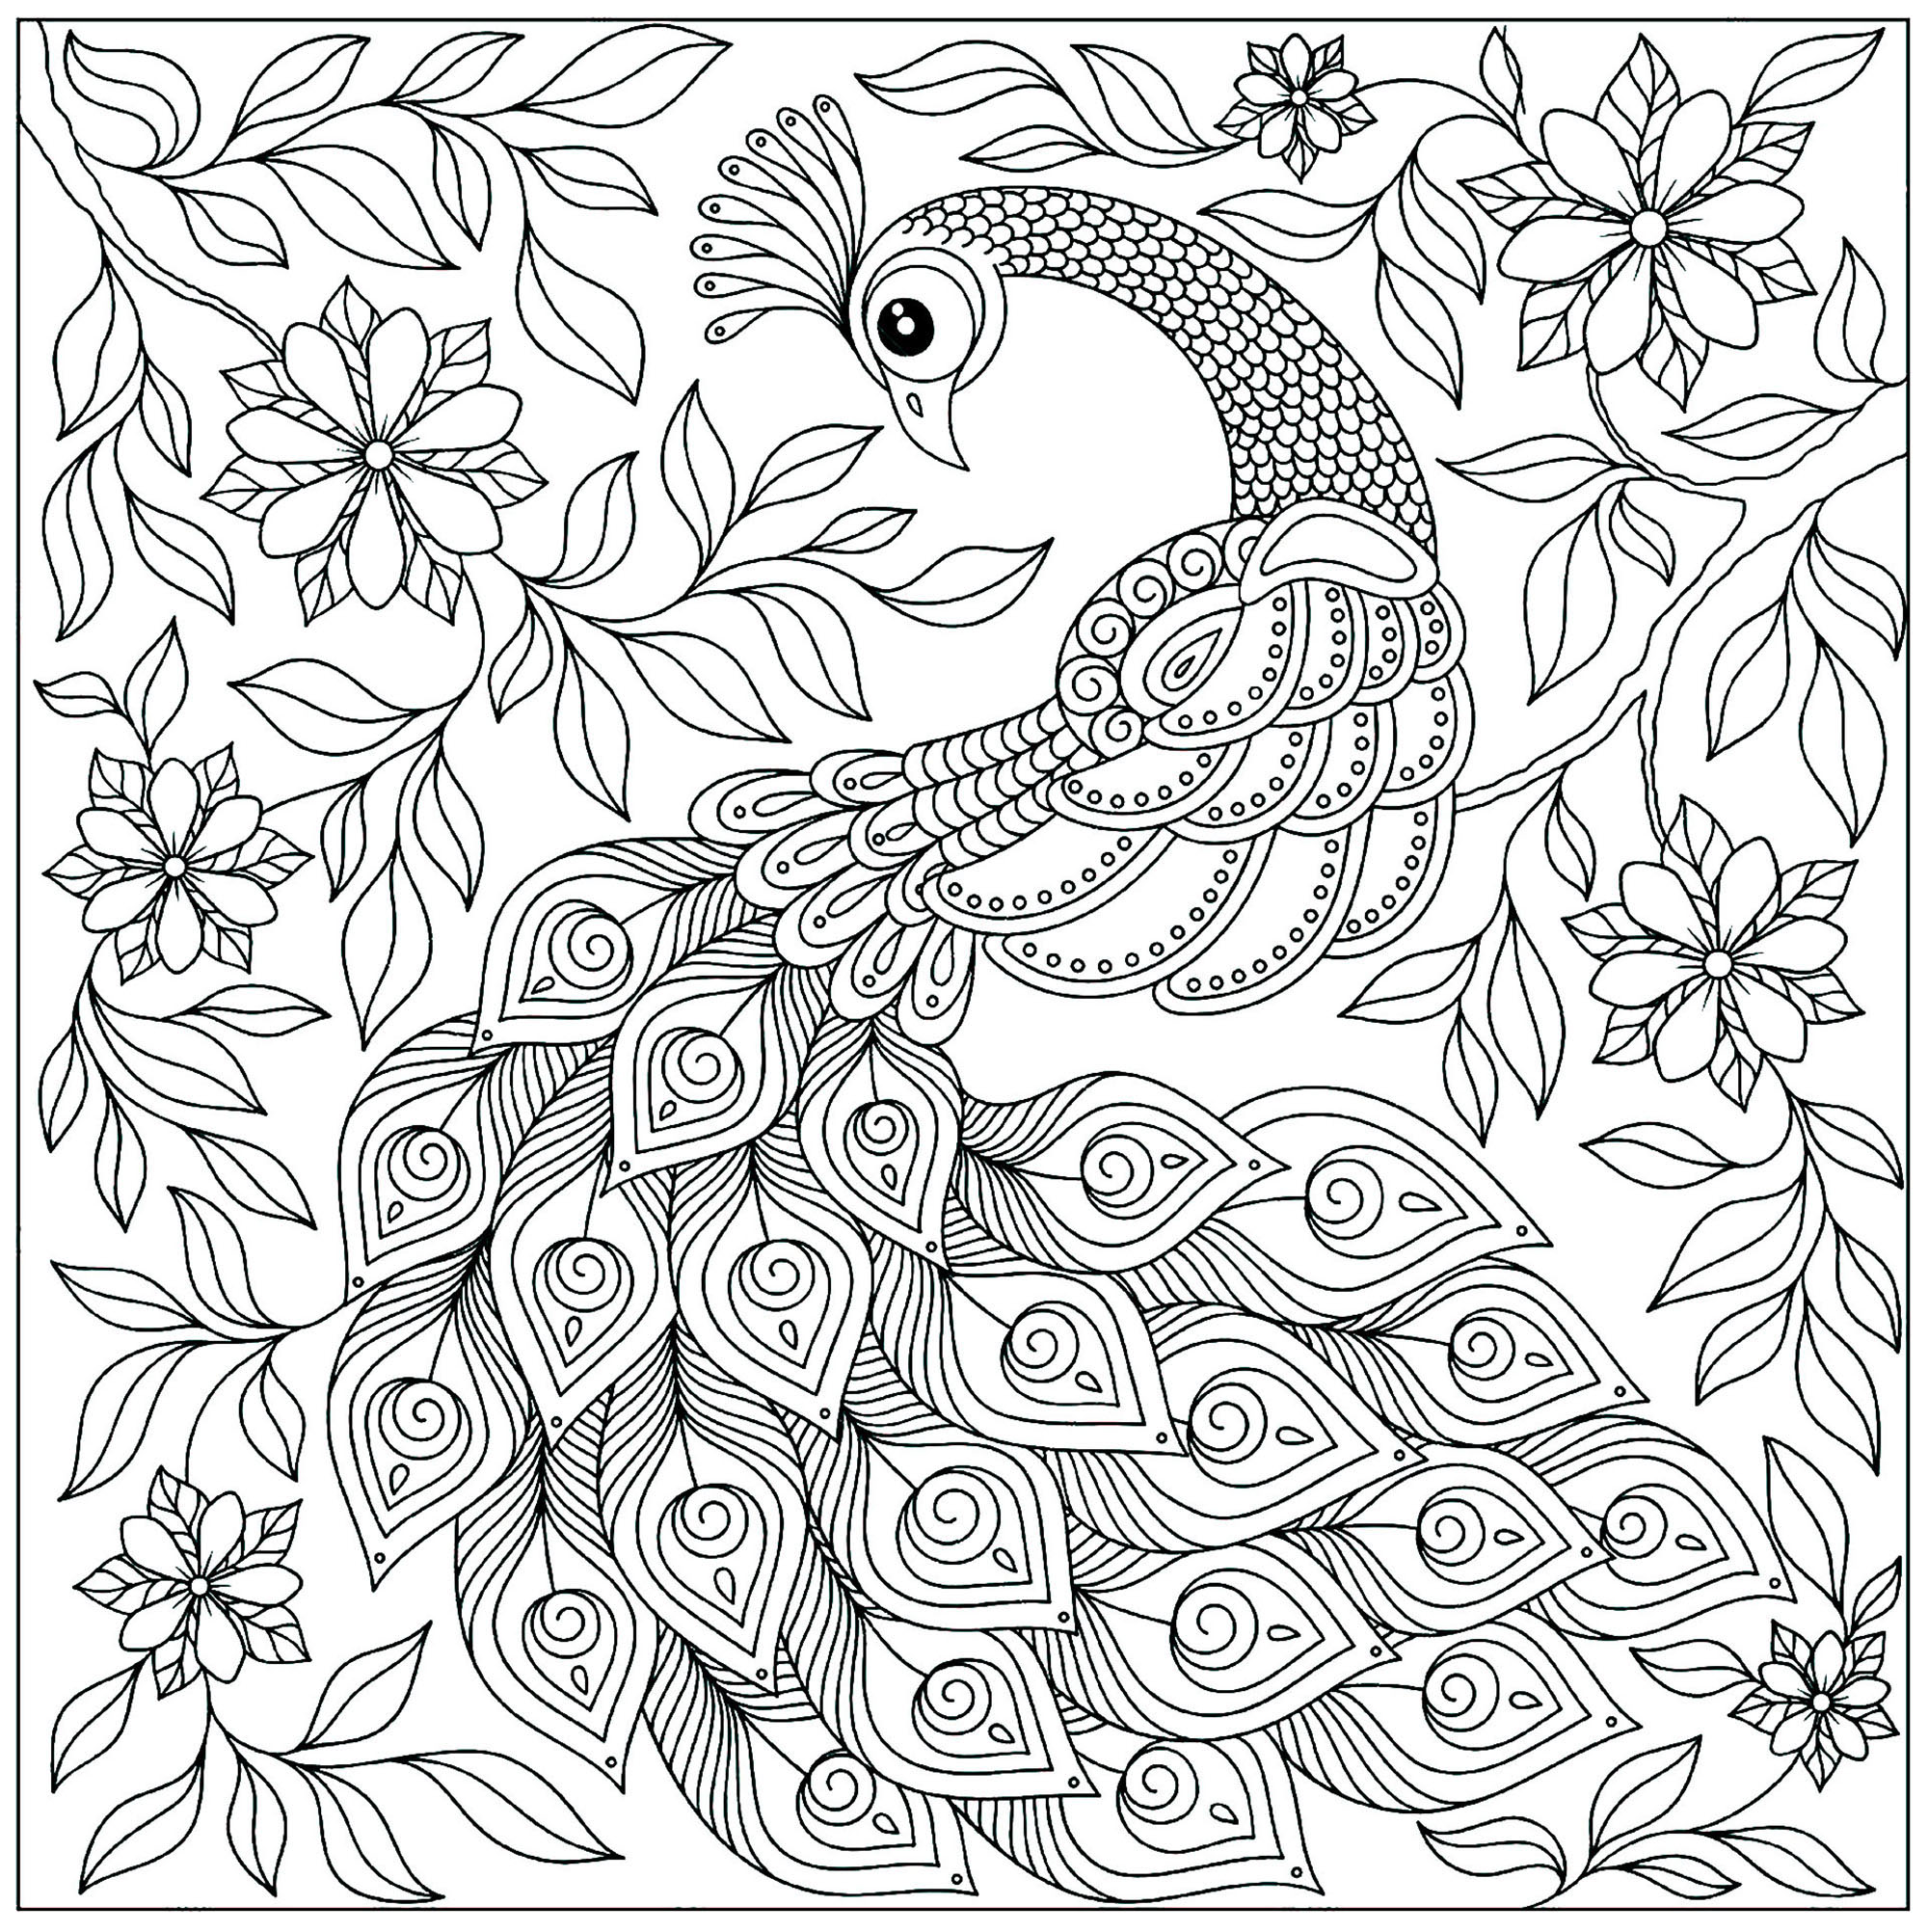 Download Peacocks to print - Peacocks Kids Coloring Pages